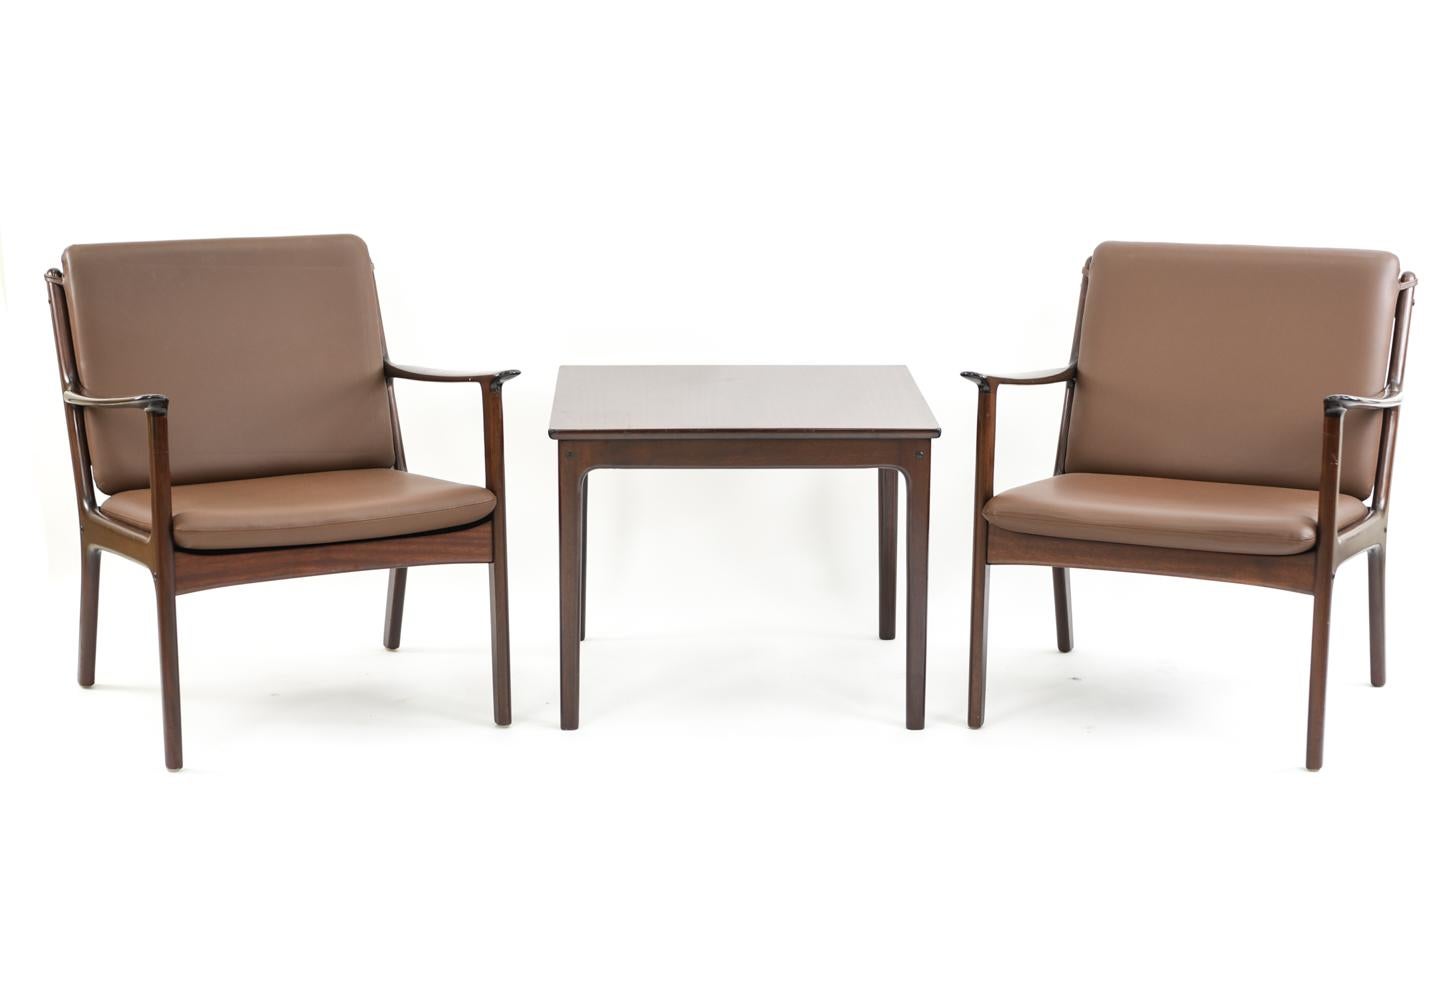 This lounge suite was designed by Ole Wanscher for Poul Jeppesen. These model PJ112 lounge chairs are complemented by the matching side table. All with mahogany frames, these chairs and table make a cohesive collection to unify a living space.